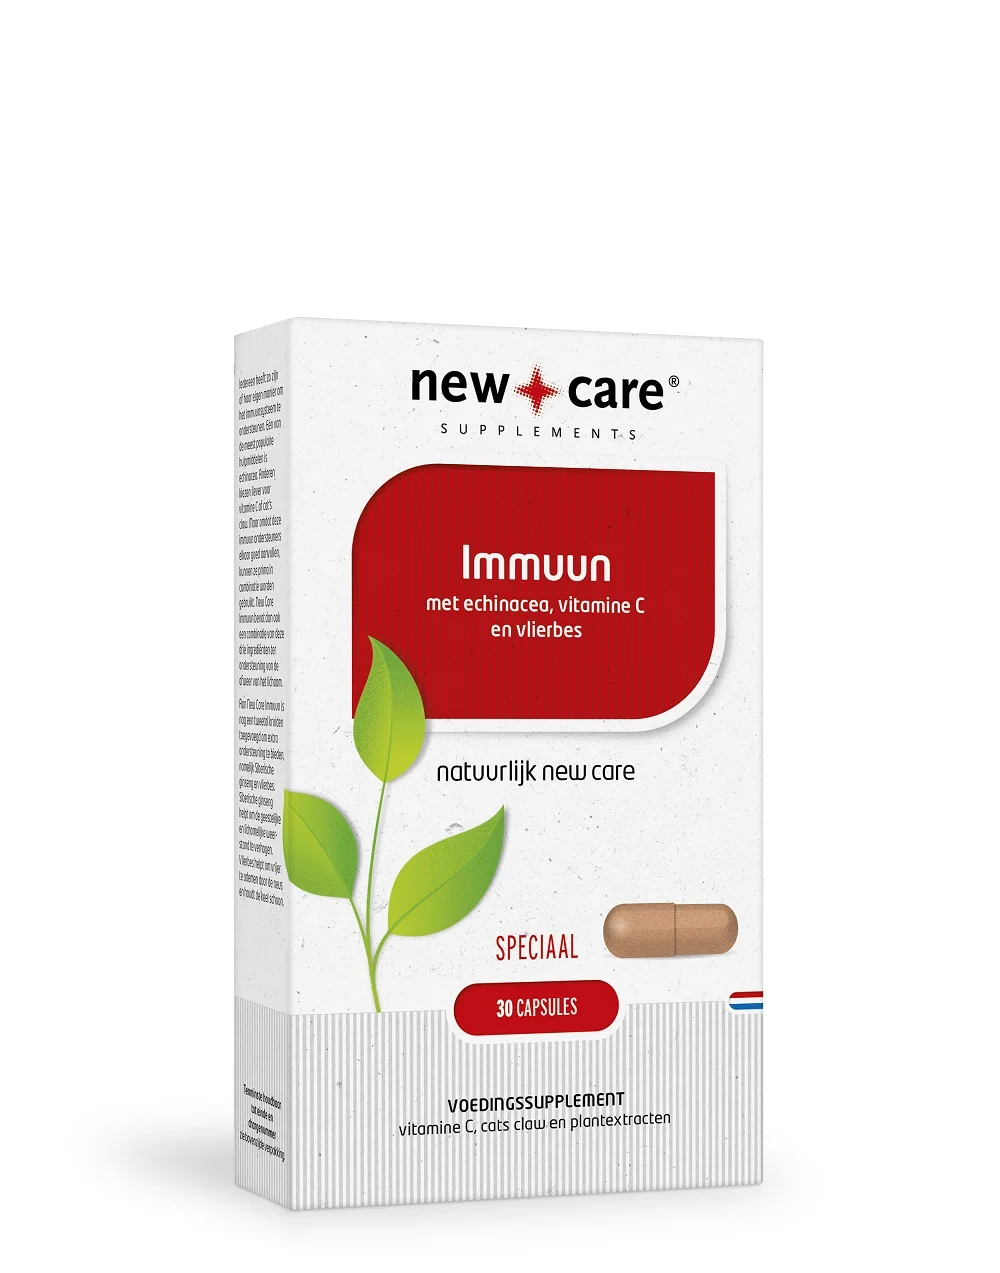 New Care - Supplements